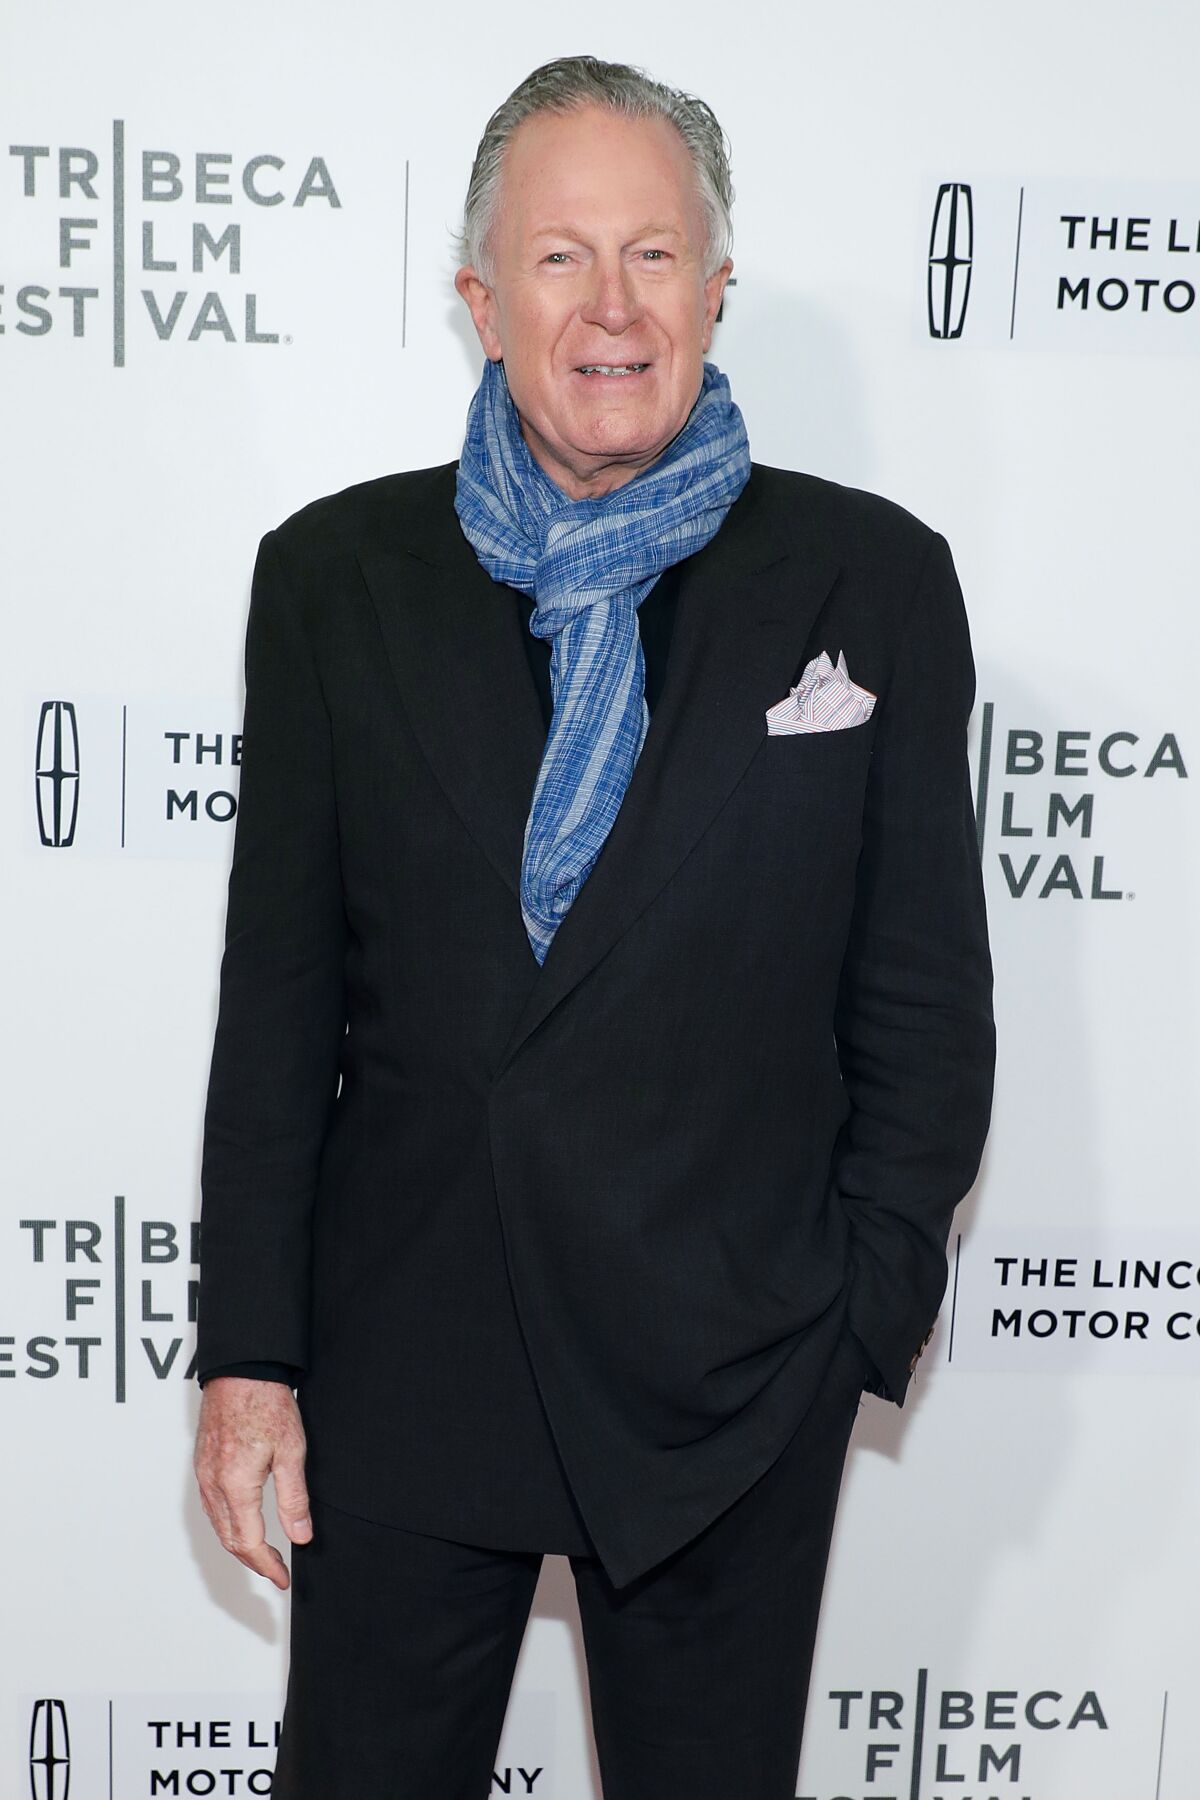 A man in a dark suit and blue scarf stands in front of a Tribeca Film Festival backdrop.